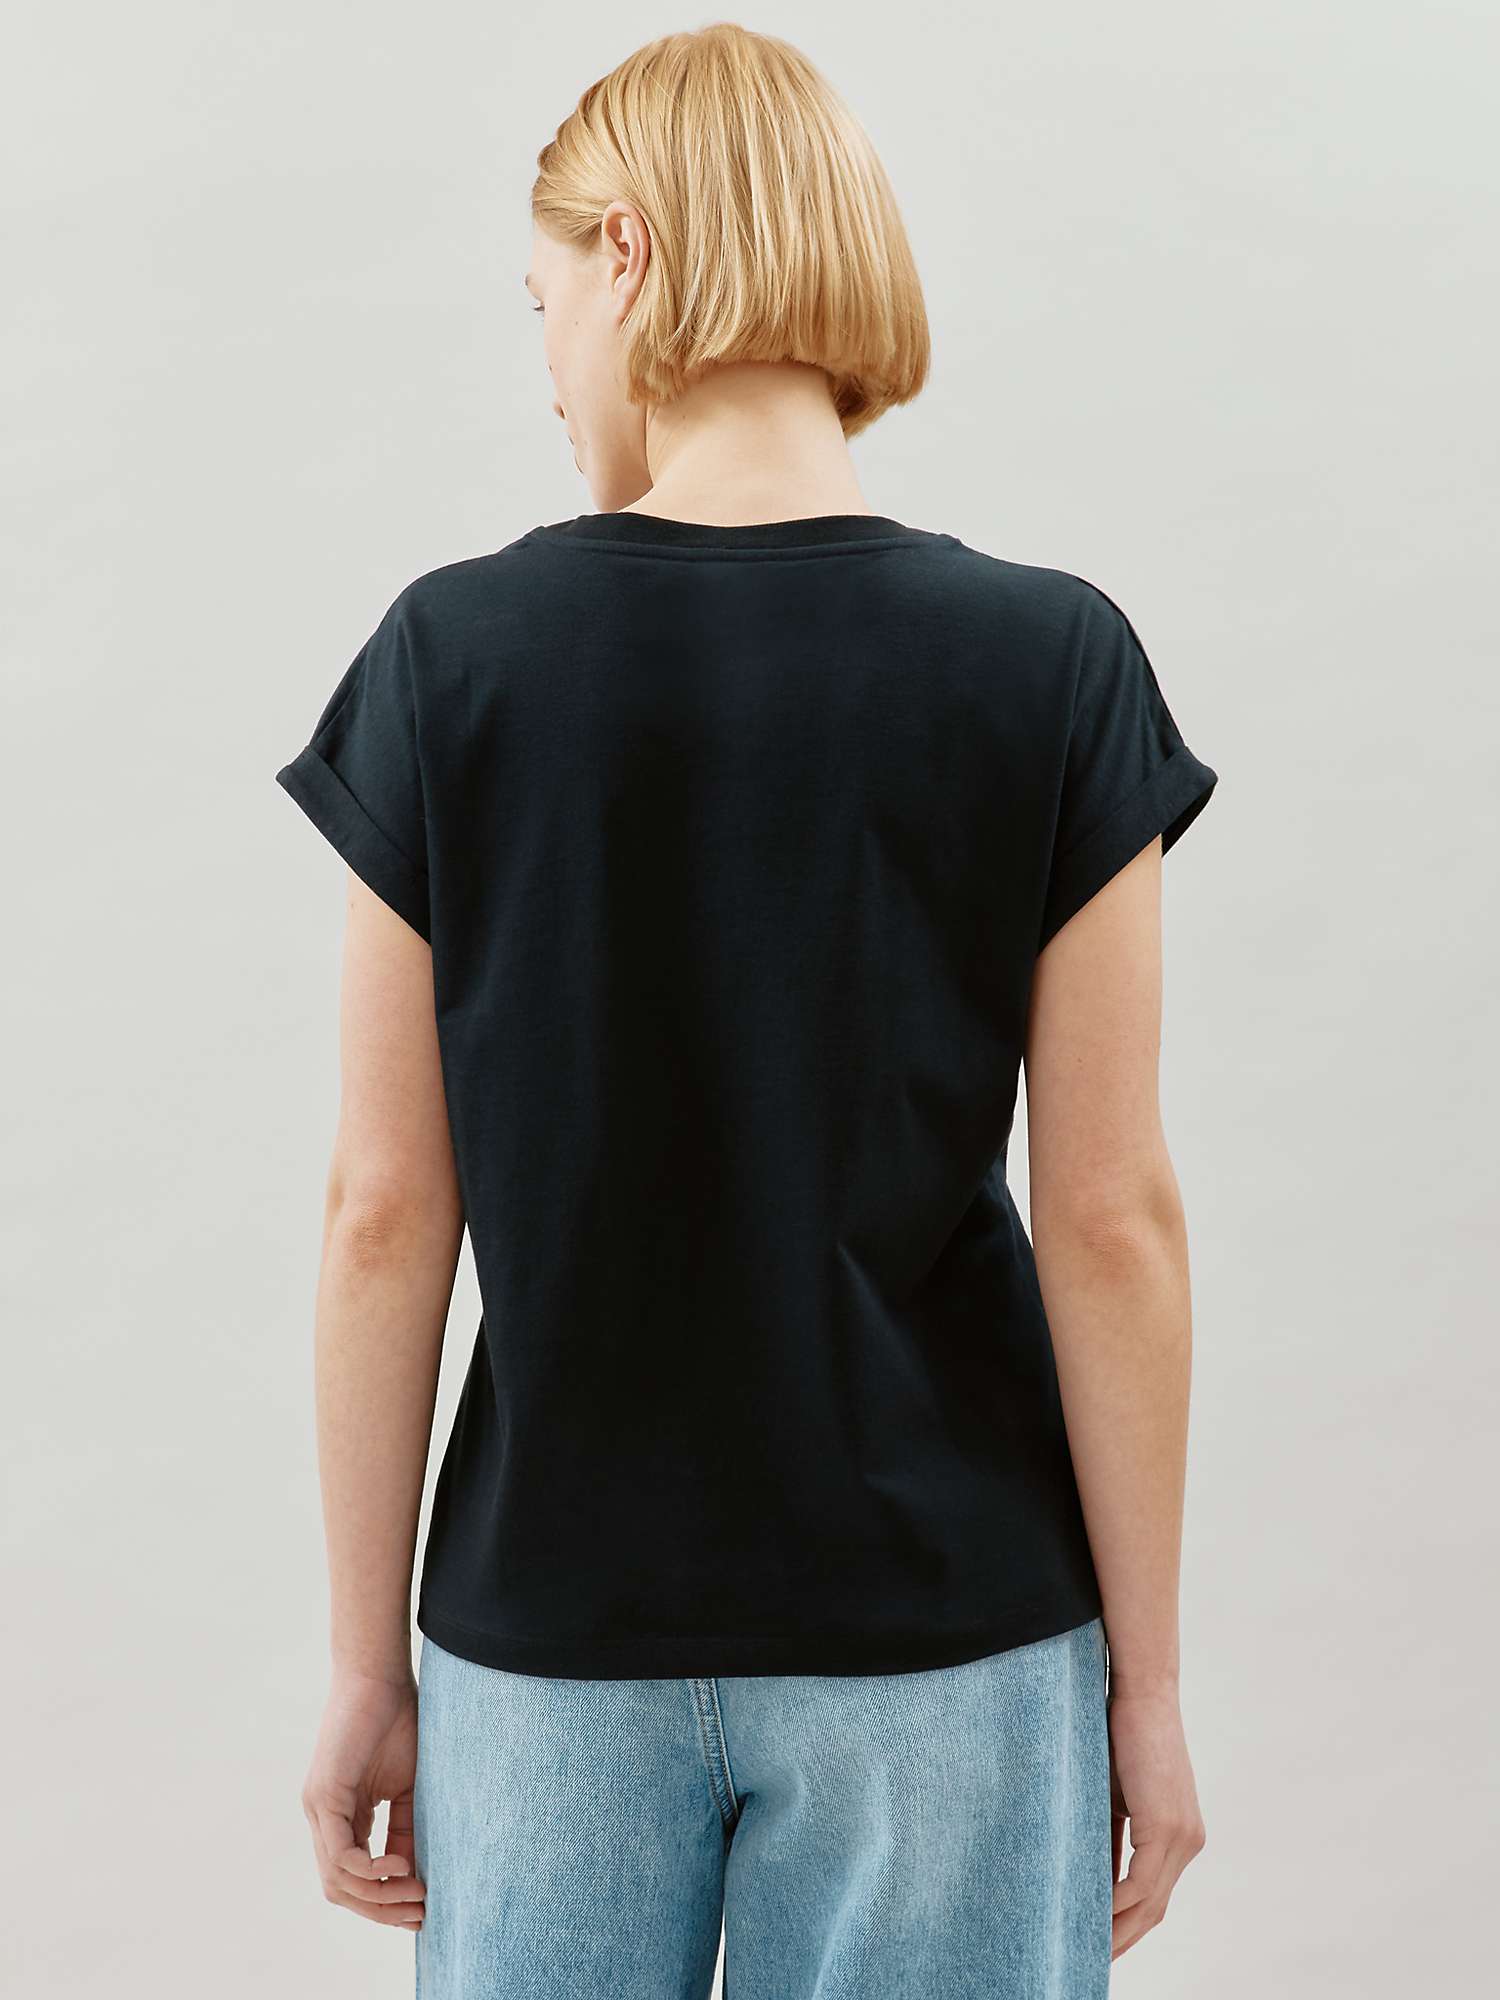 Buy Albaray Roll Back Cuff T-Shirt Online at johnlewis.com